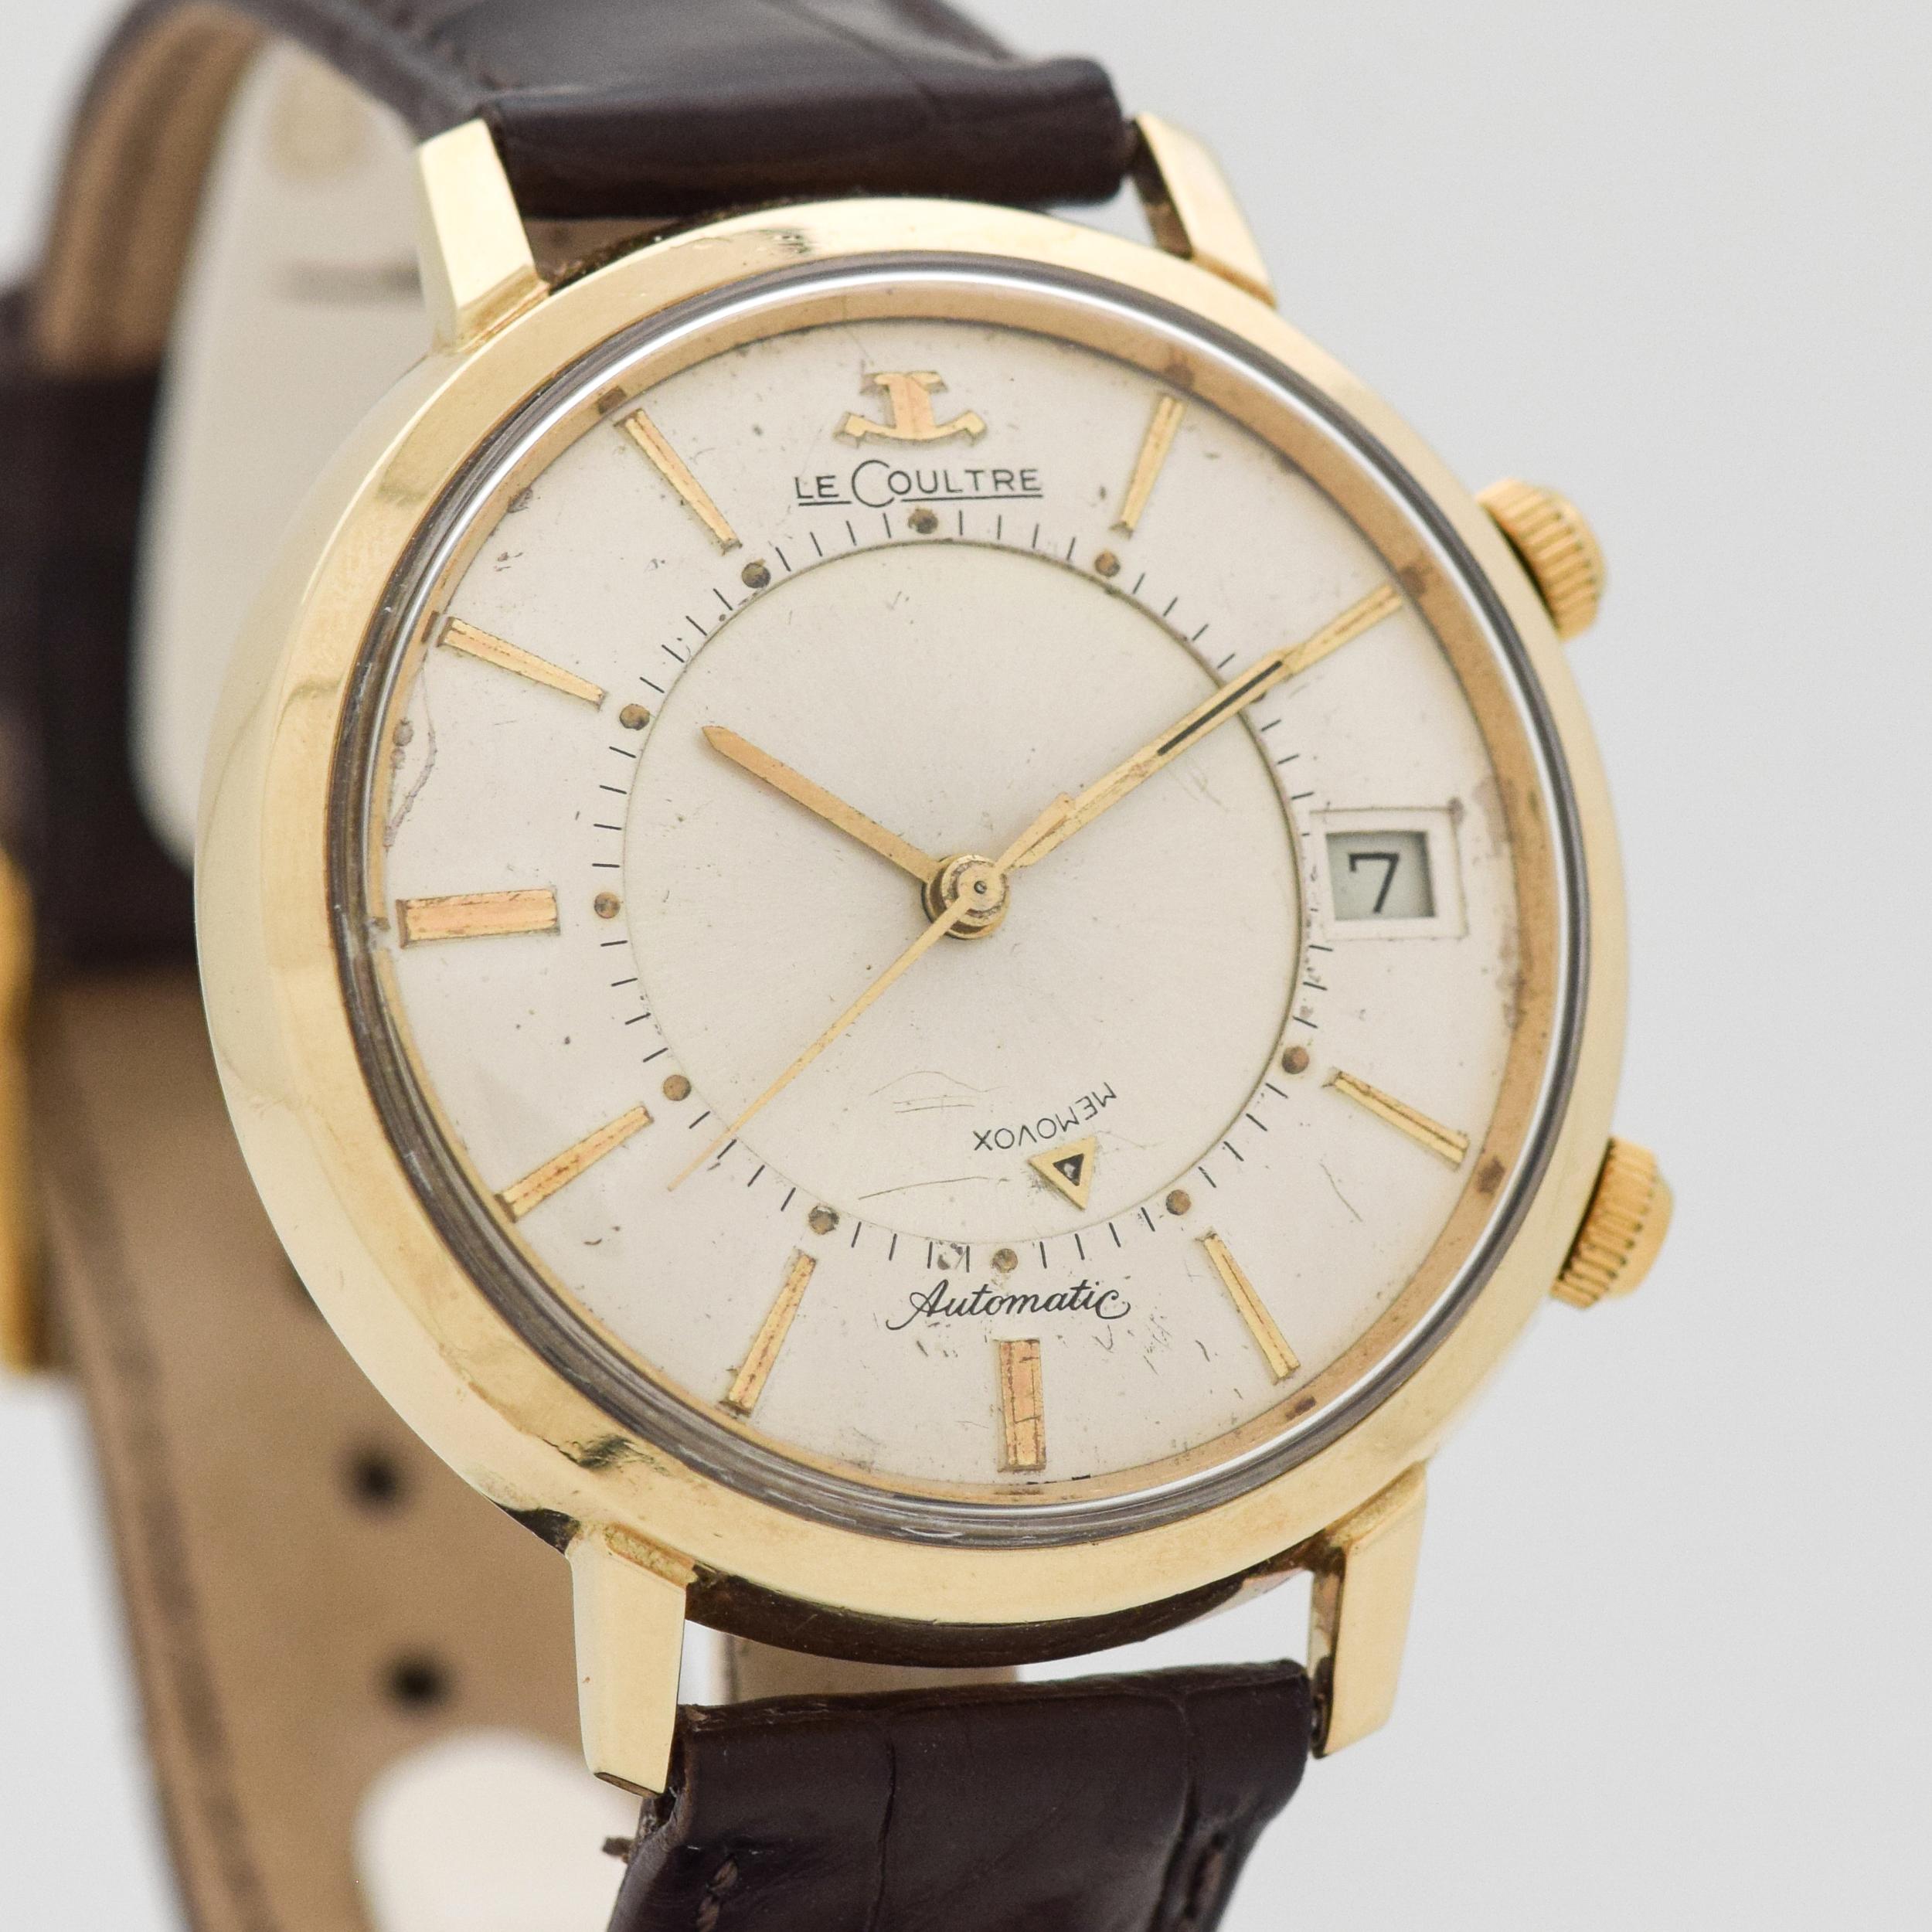 1950's Vintage Jaeger - Le Coultre Memovox Alarm Automatic with RARE Date Feature 10k Yellow Gold Filled watch with Large 38 mm Case and Original Silver Dial with Applied Gold Color Stick/Bar/Baton Markers Markers. 38mm x 44mm lug to lug (1.5 in. x